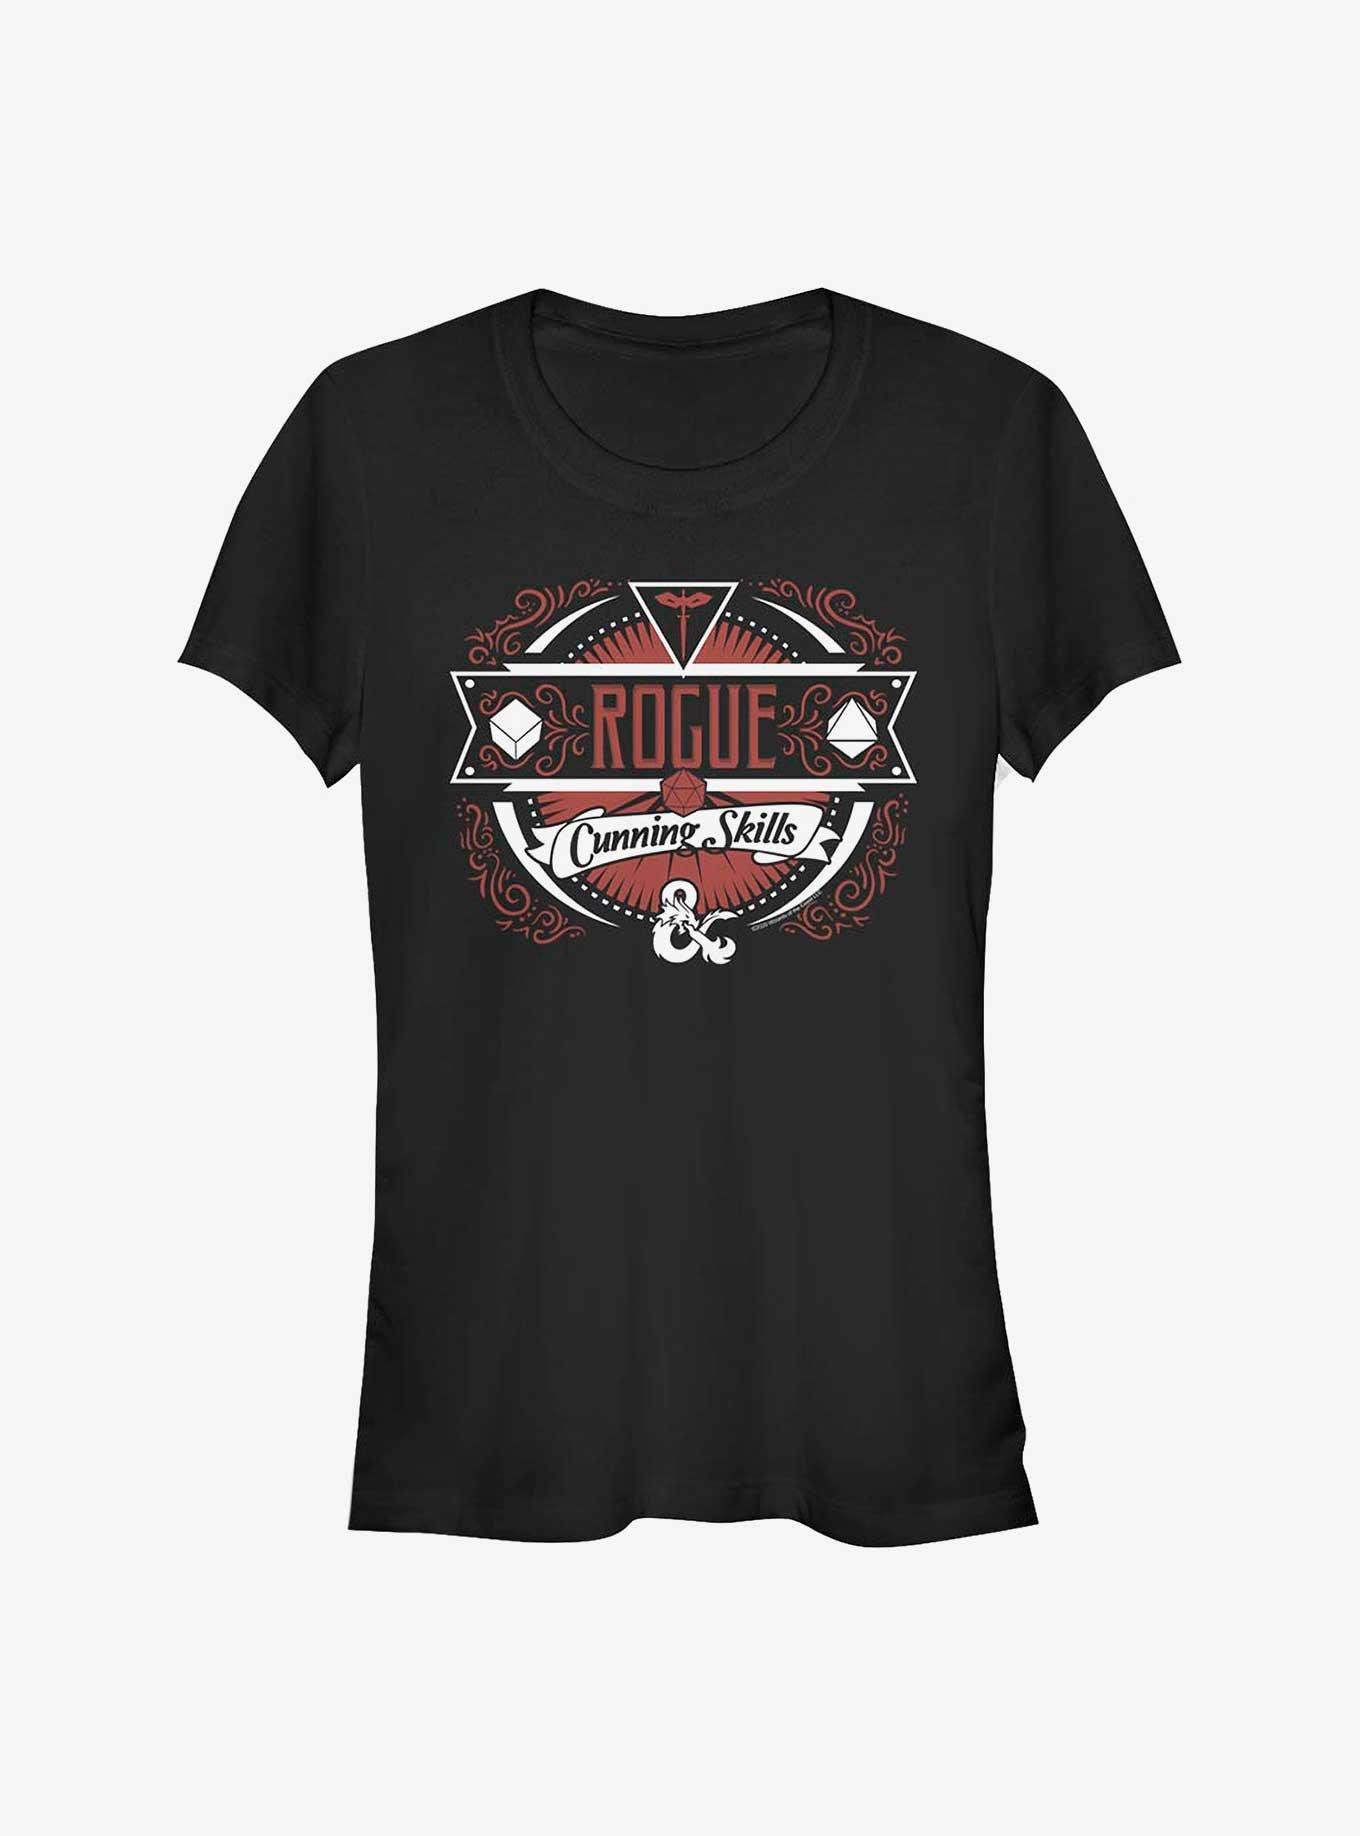 Dungeons And Dragons Rogue Label Girls T-Shirt, BLACK, hi-res